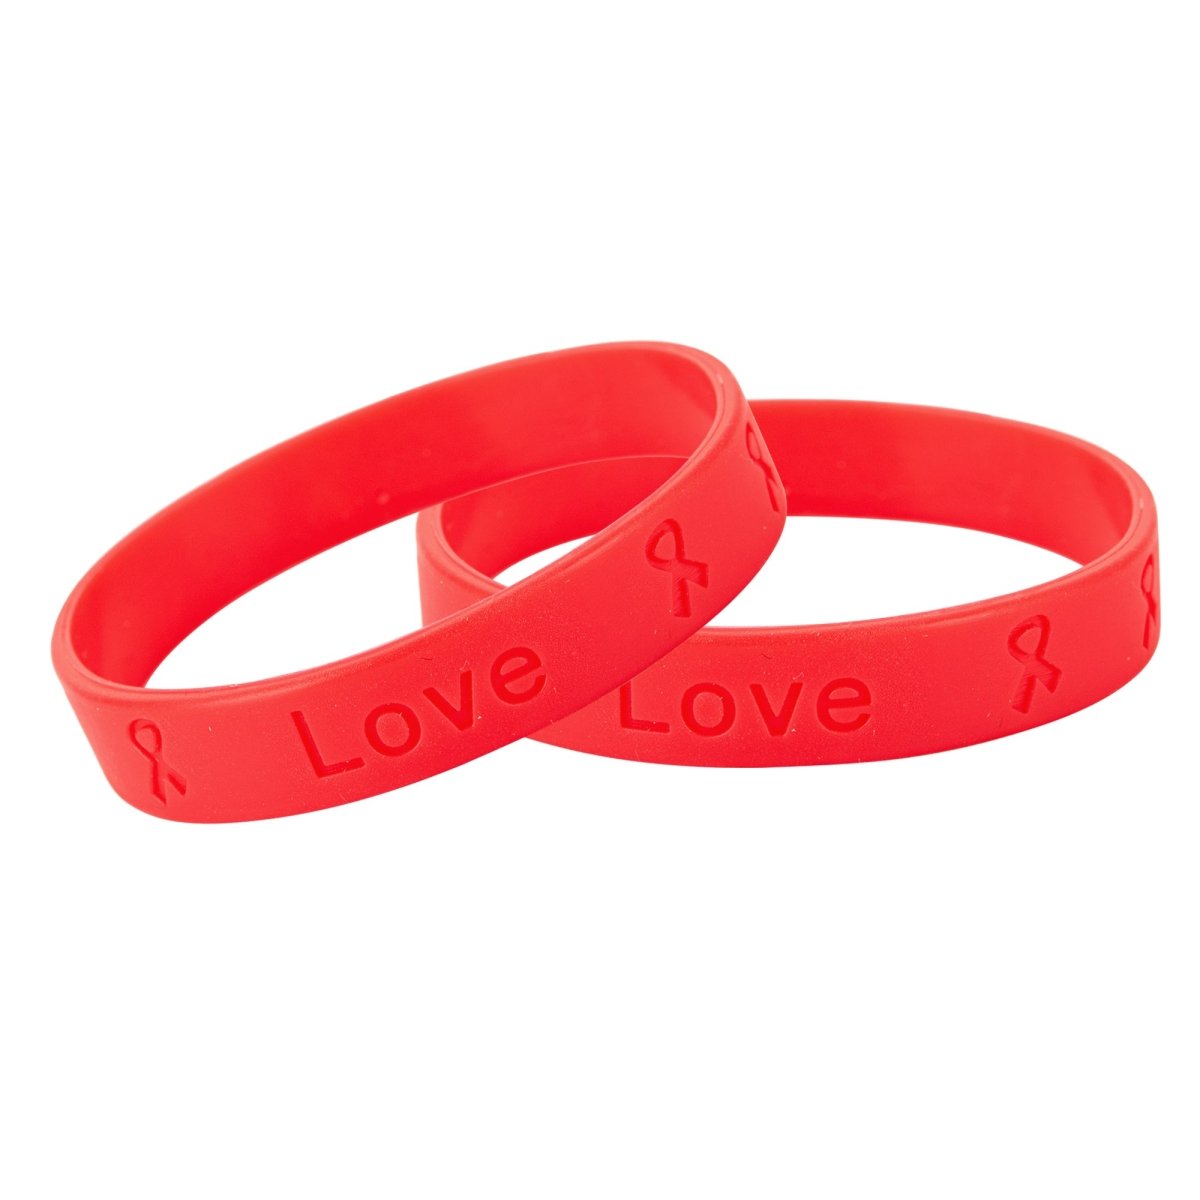 Adult Red Awareness Silicone Bracelet Wristbands - Fundraising For A Cause